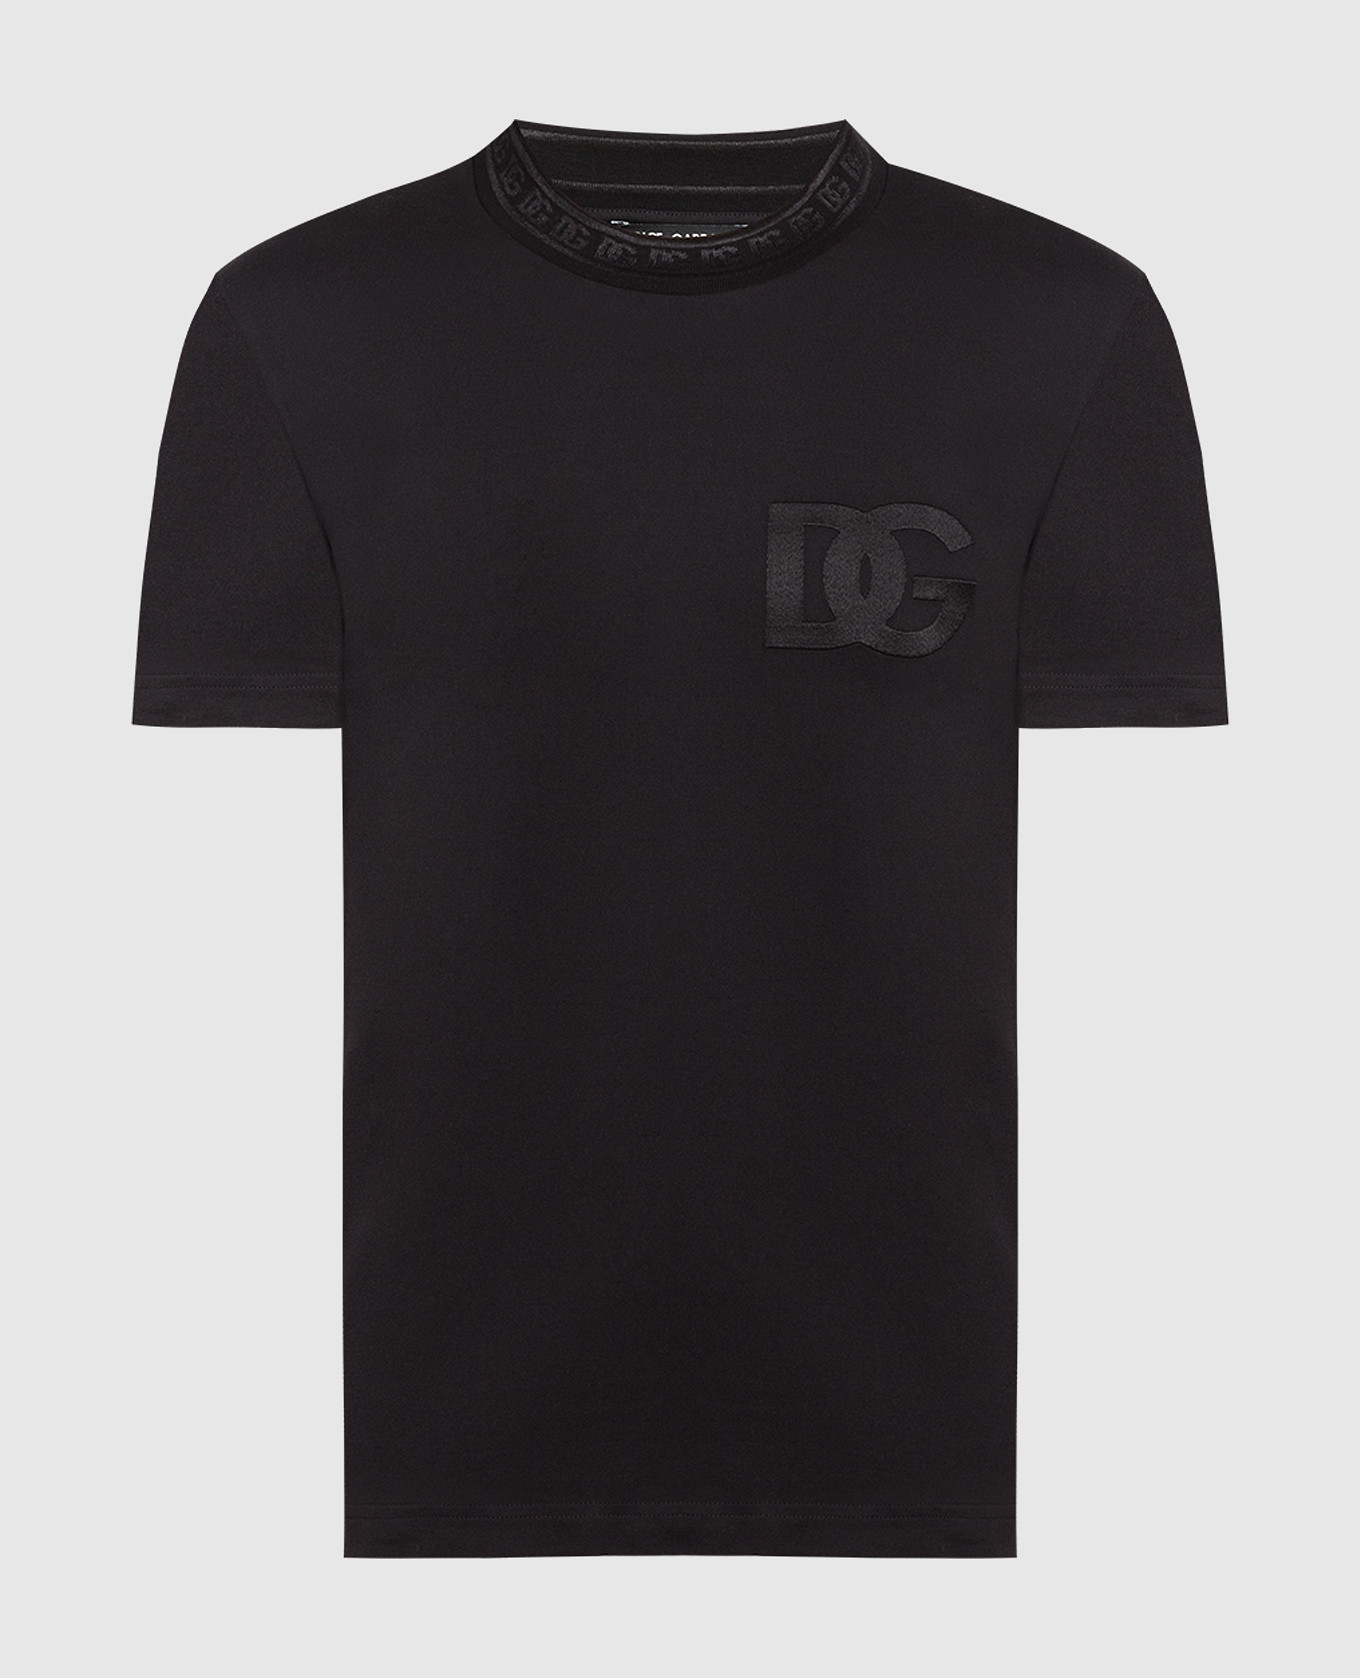 Black t-shirt with DG logo embroidery